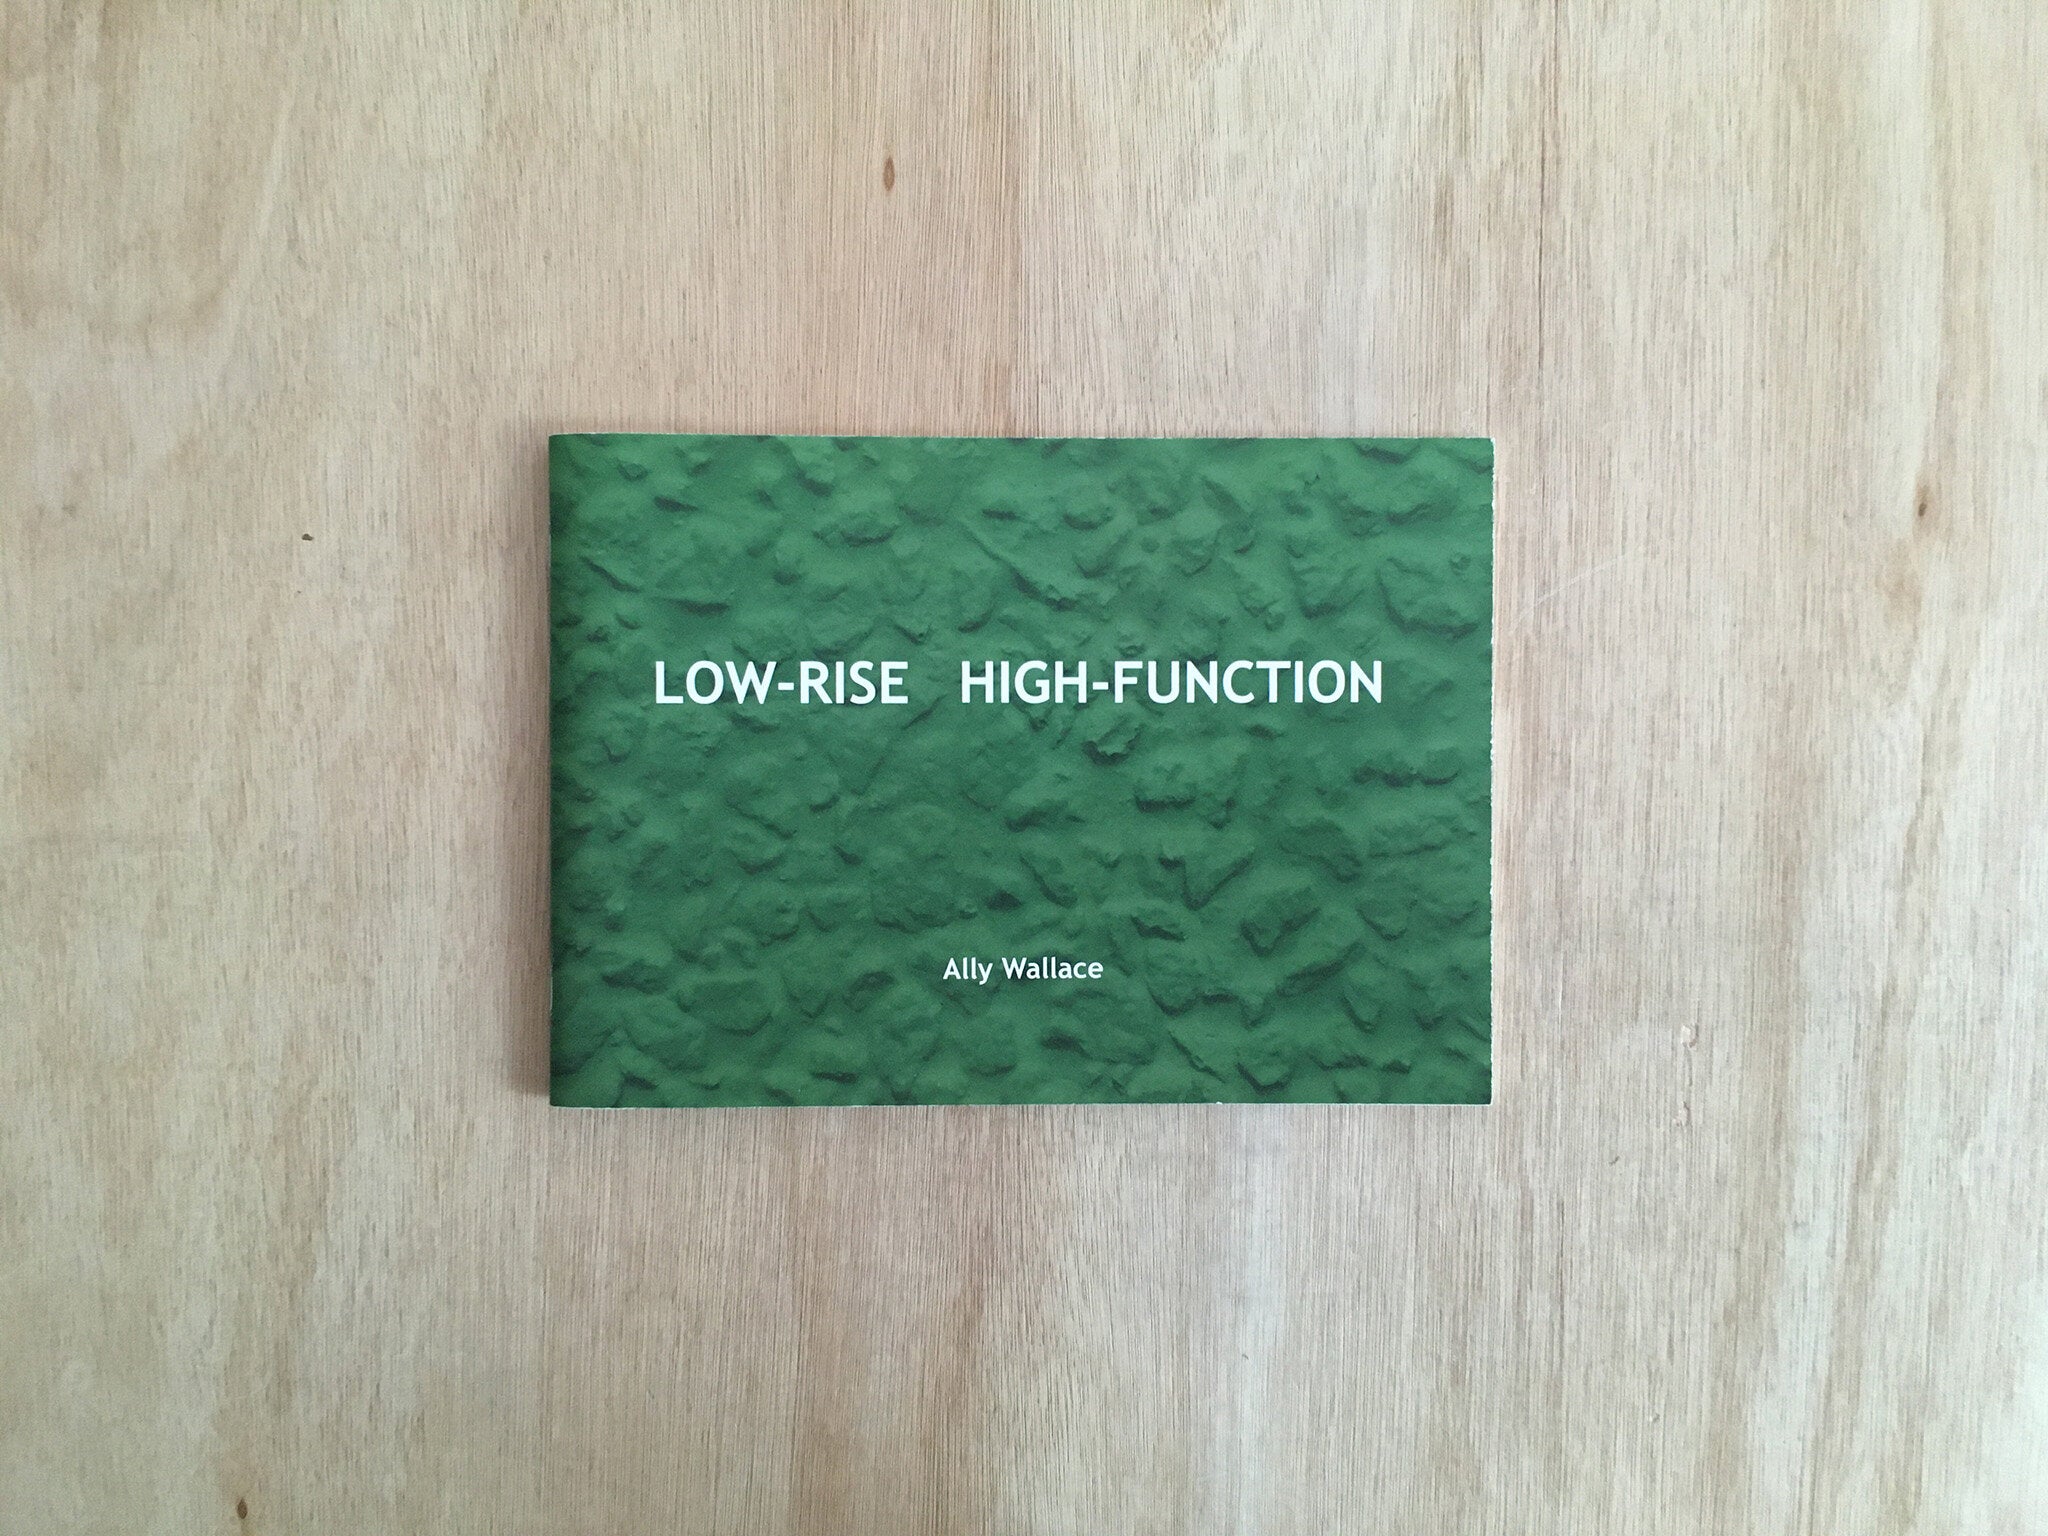 LOW-RISE HIGH-FUNCTION by Ally Wallace